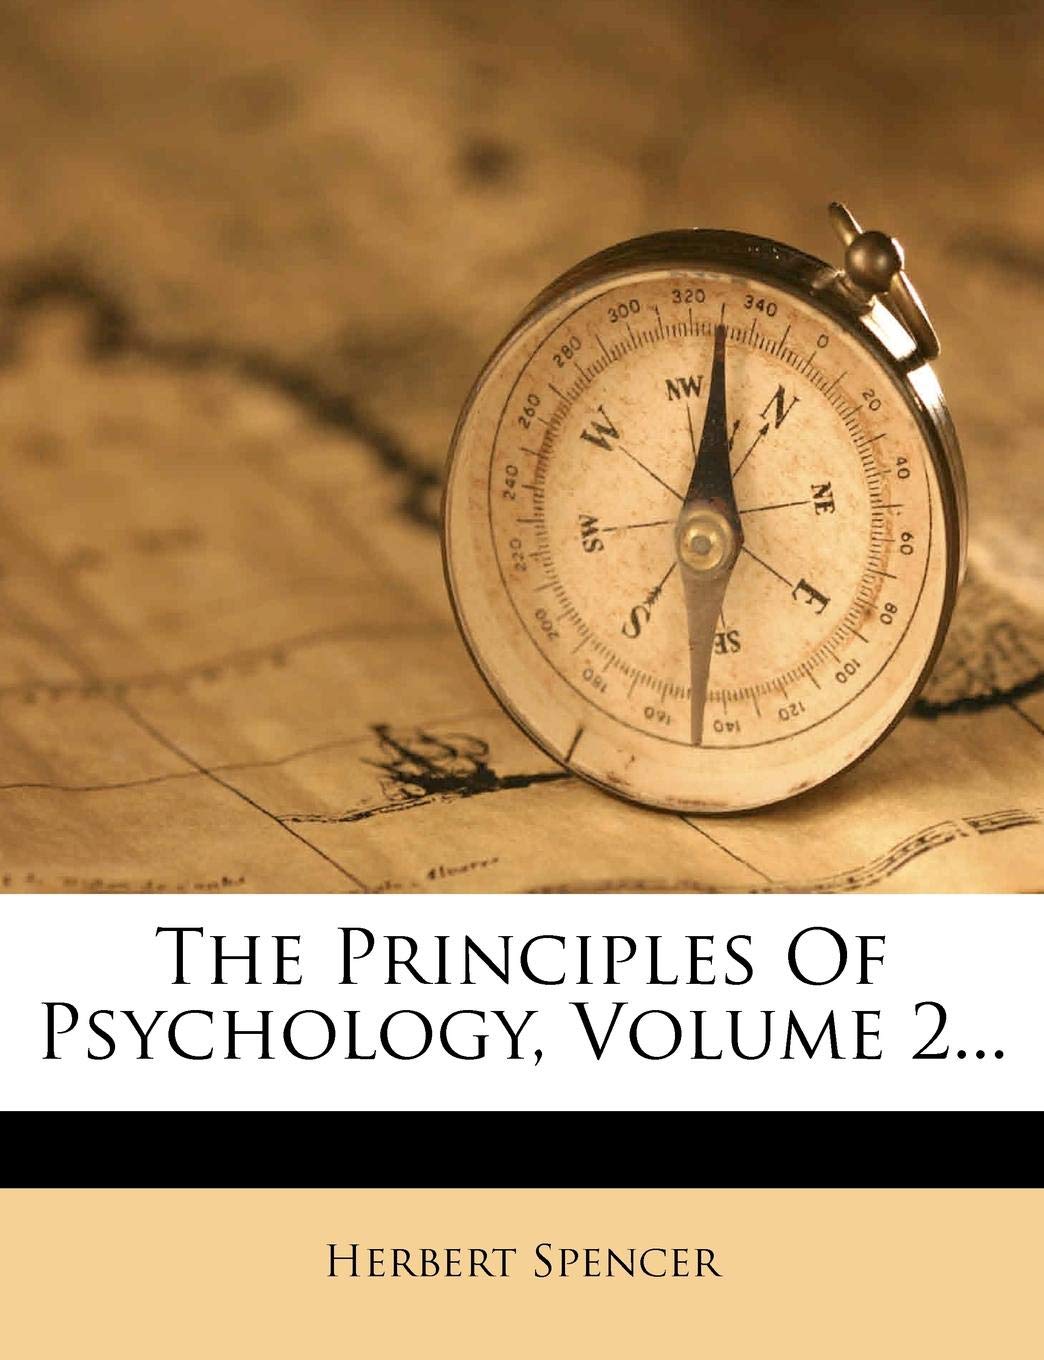 THE PRINCIPLES OF PSYCHOLOGY, VOLUME 2